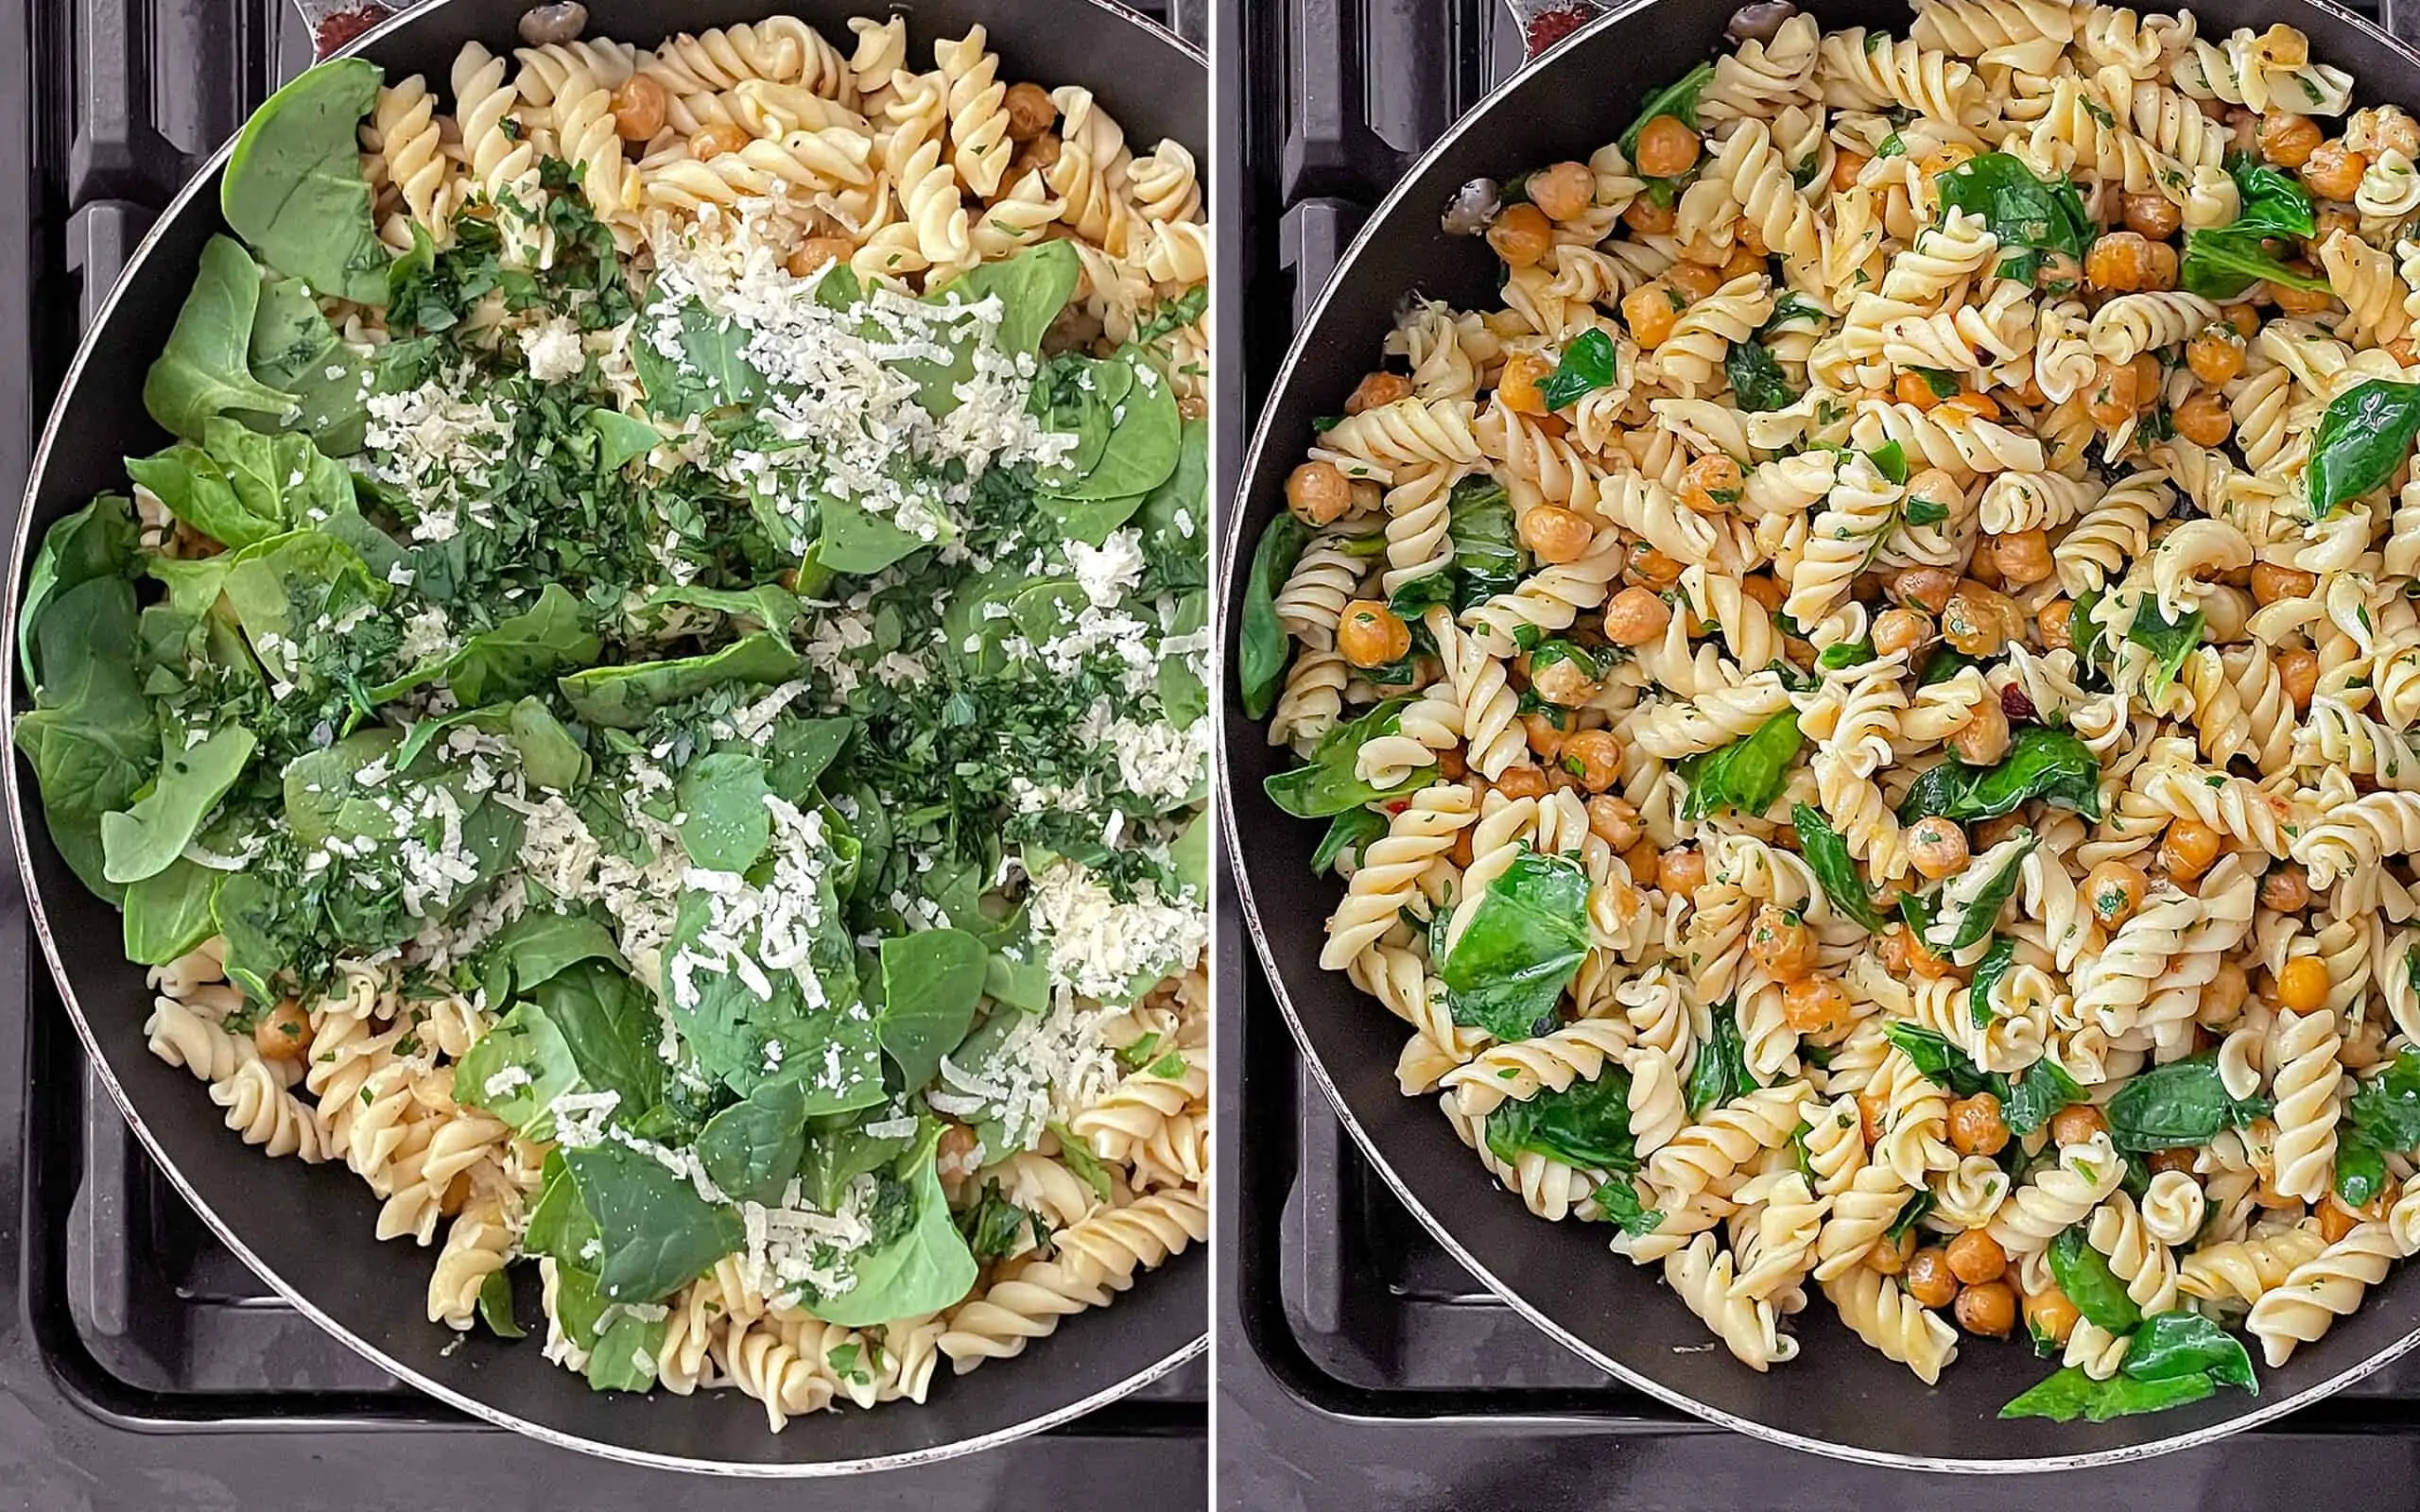 Stir the spinach into the pasta and chickpeas in the skillet, letting the greens wilt.